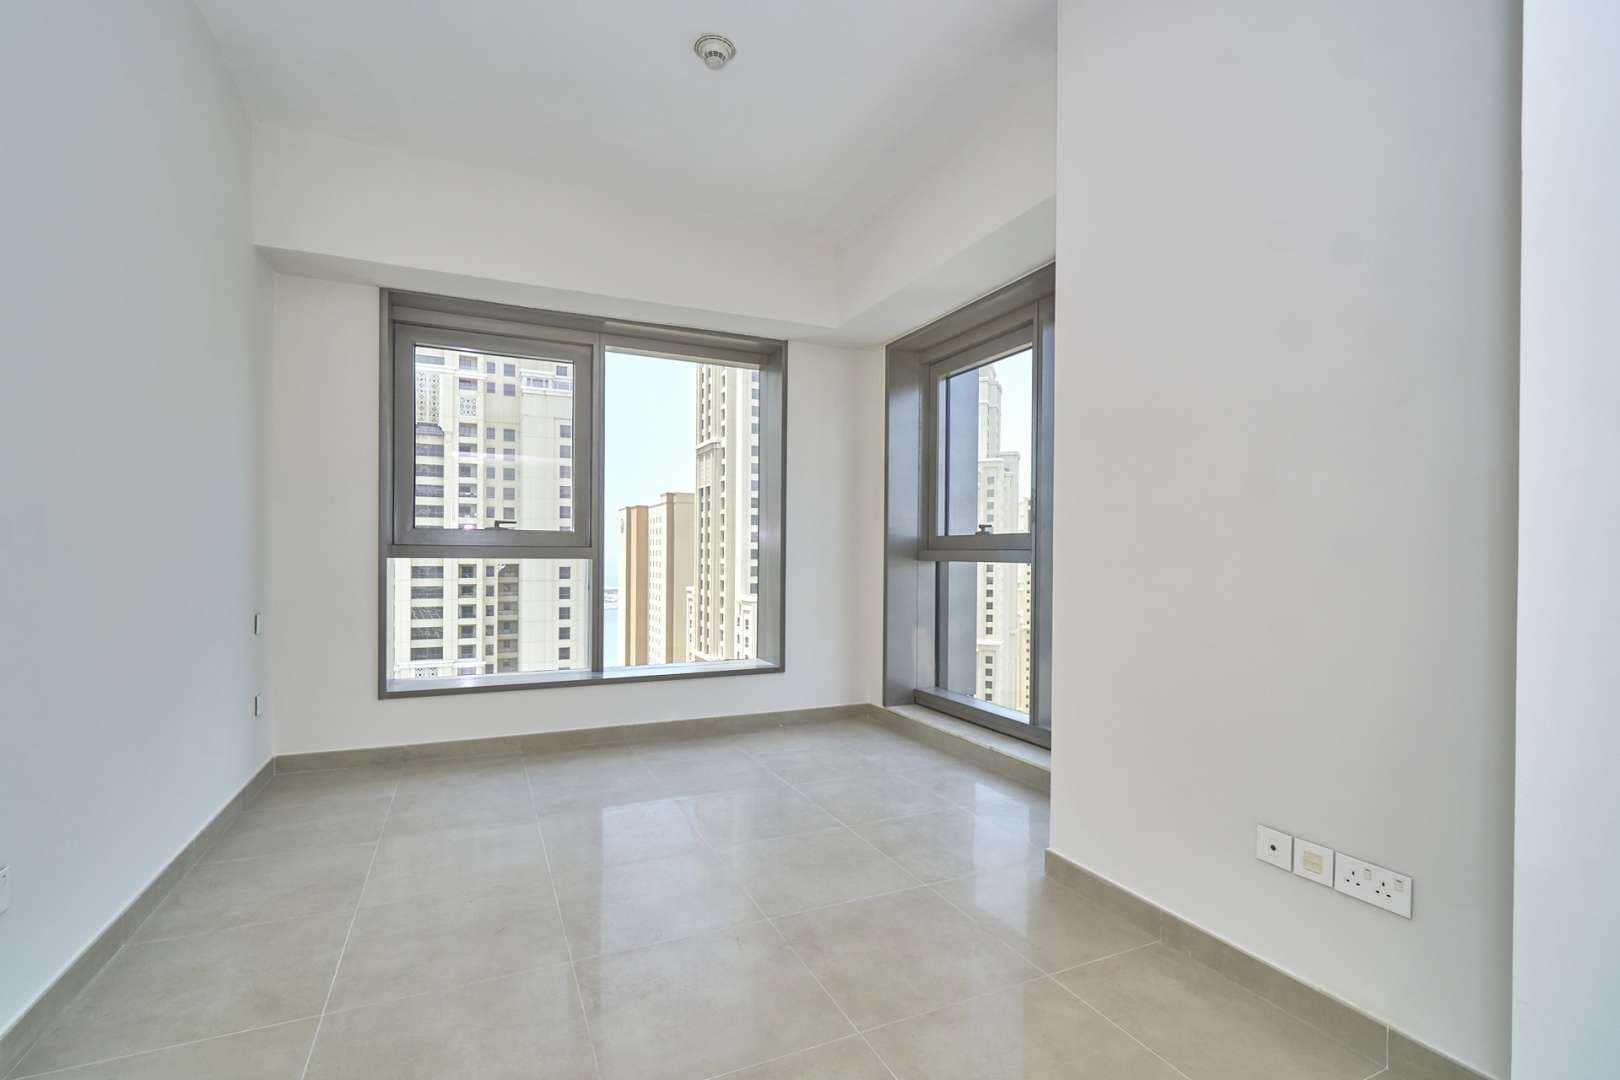 3 Bedroom Apartment For Rent Sparkle Towers Lp07208 A97979b1cef7a80.jpg